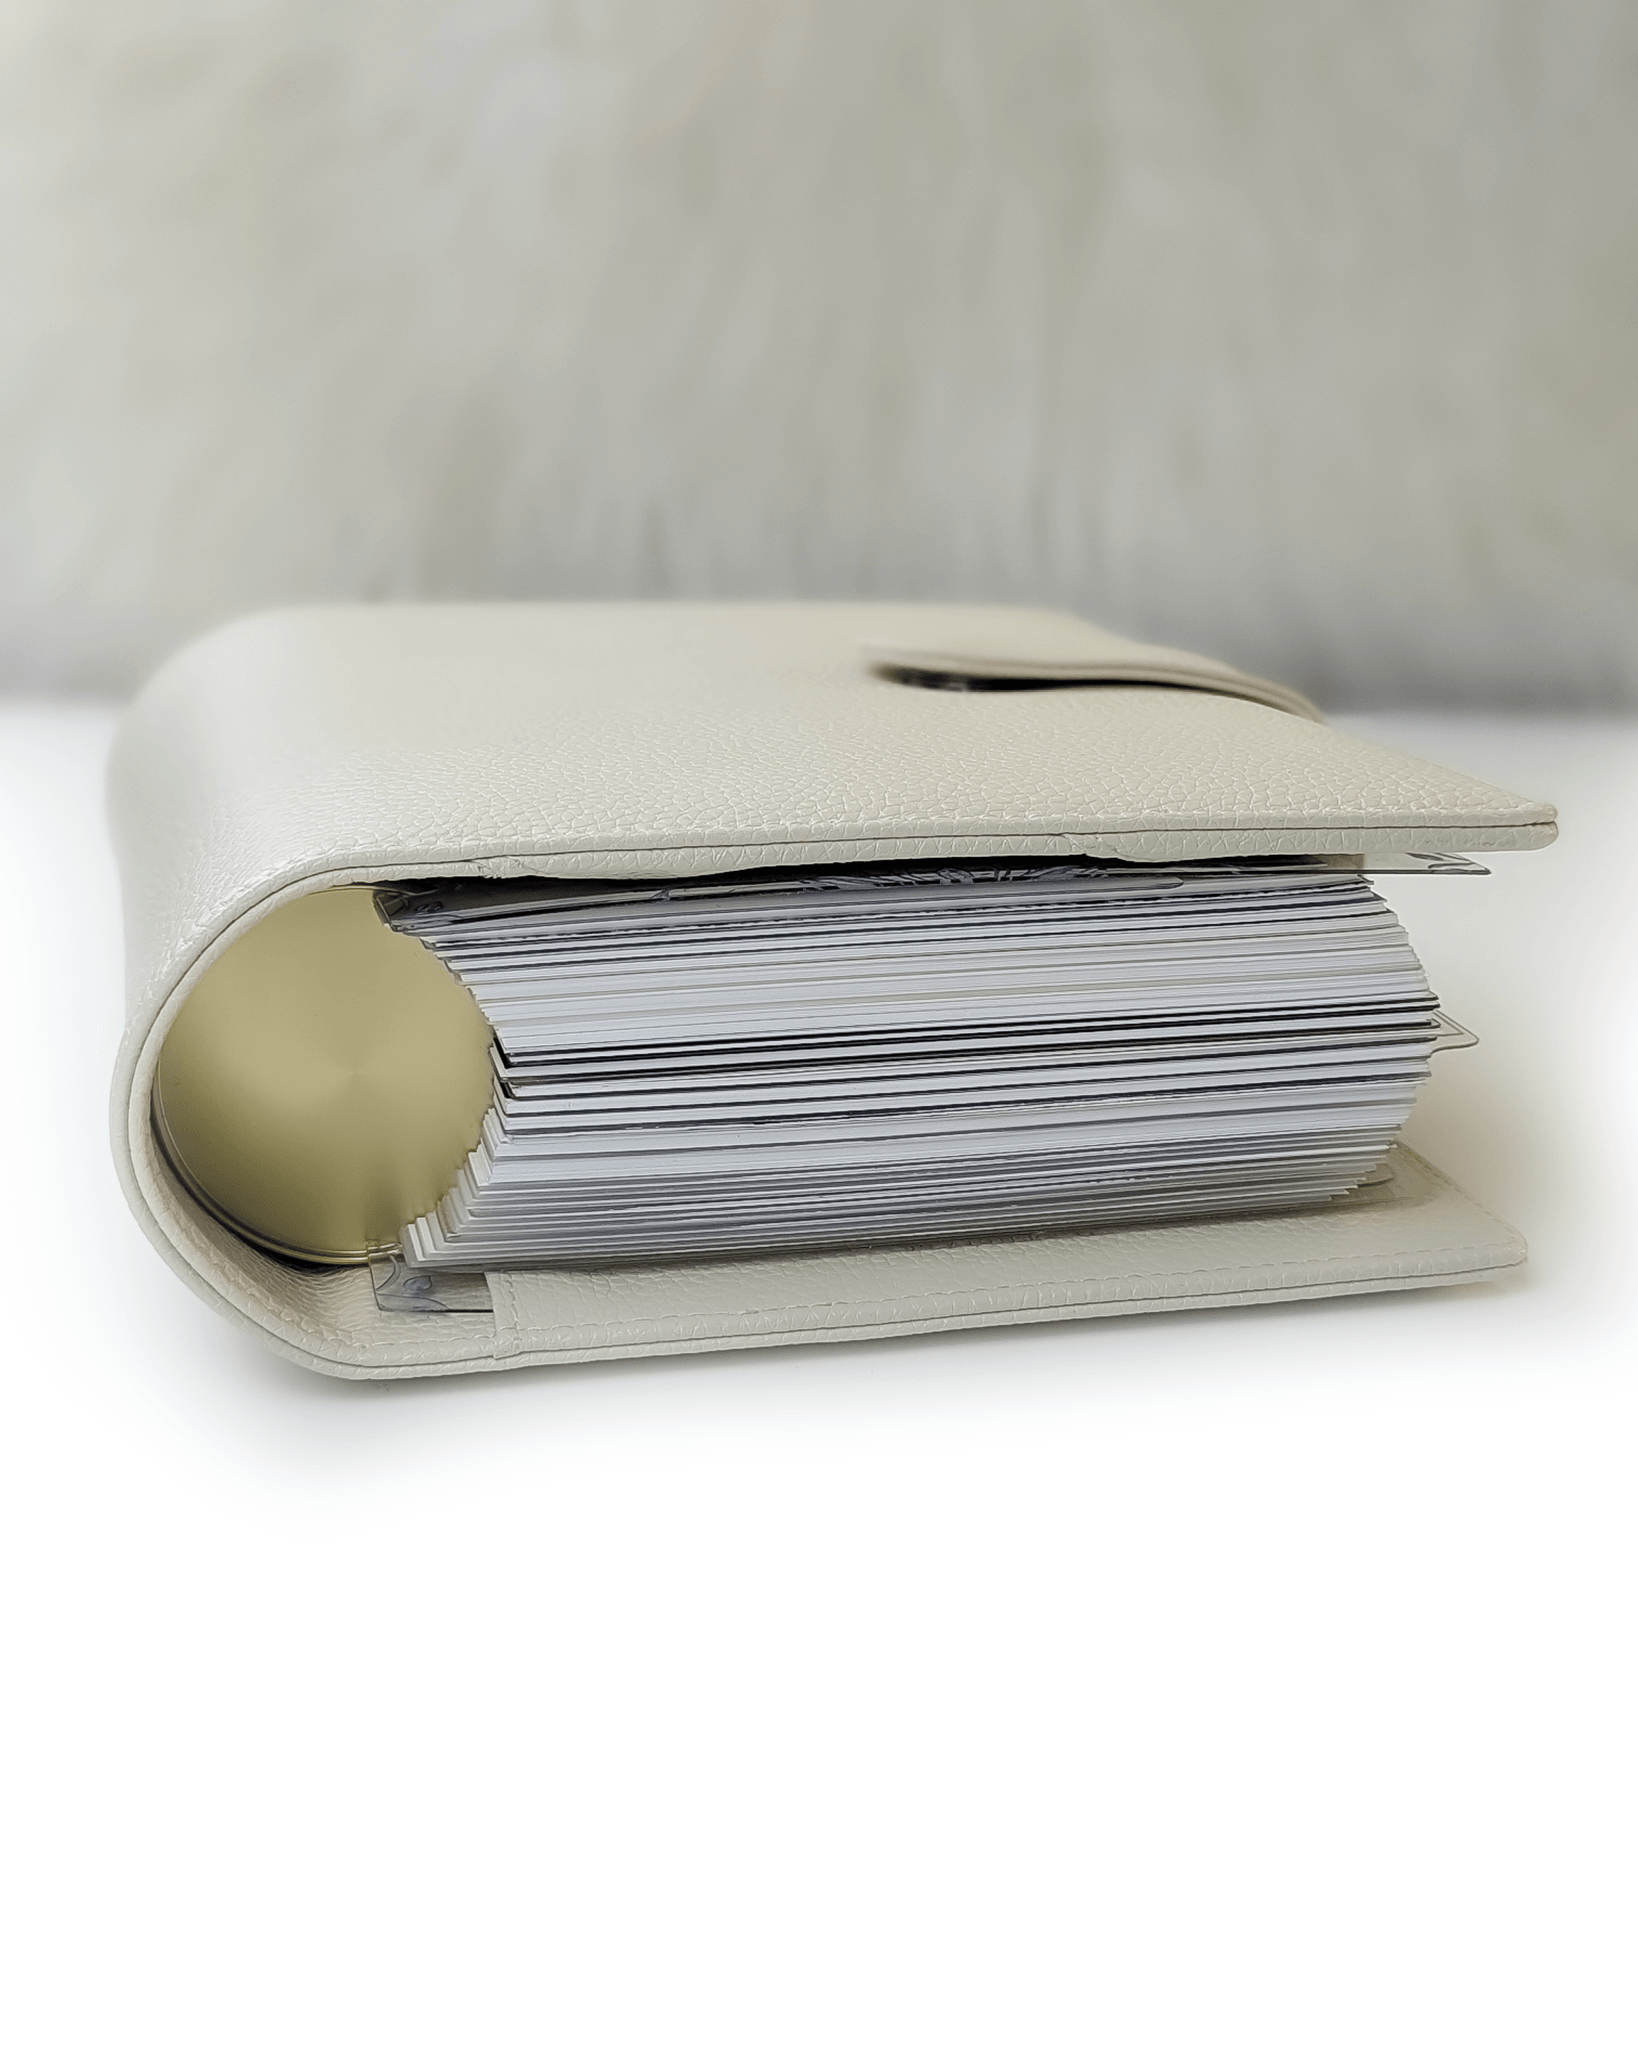 Vegan leather wrap around discbound planner cover for discbound planners and disc notebooks by Jane's Agenda.